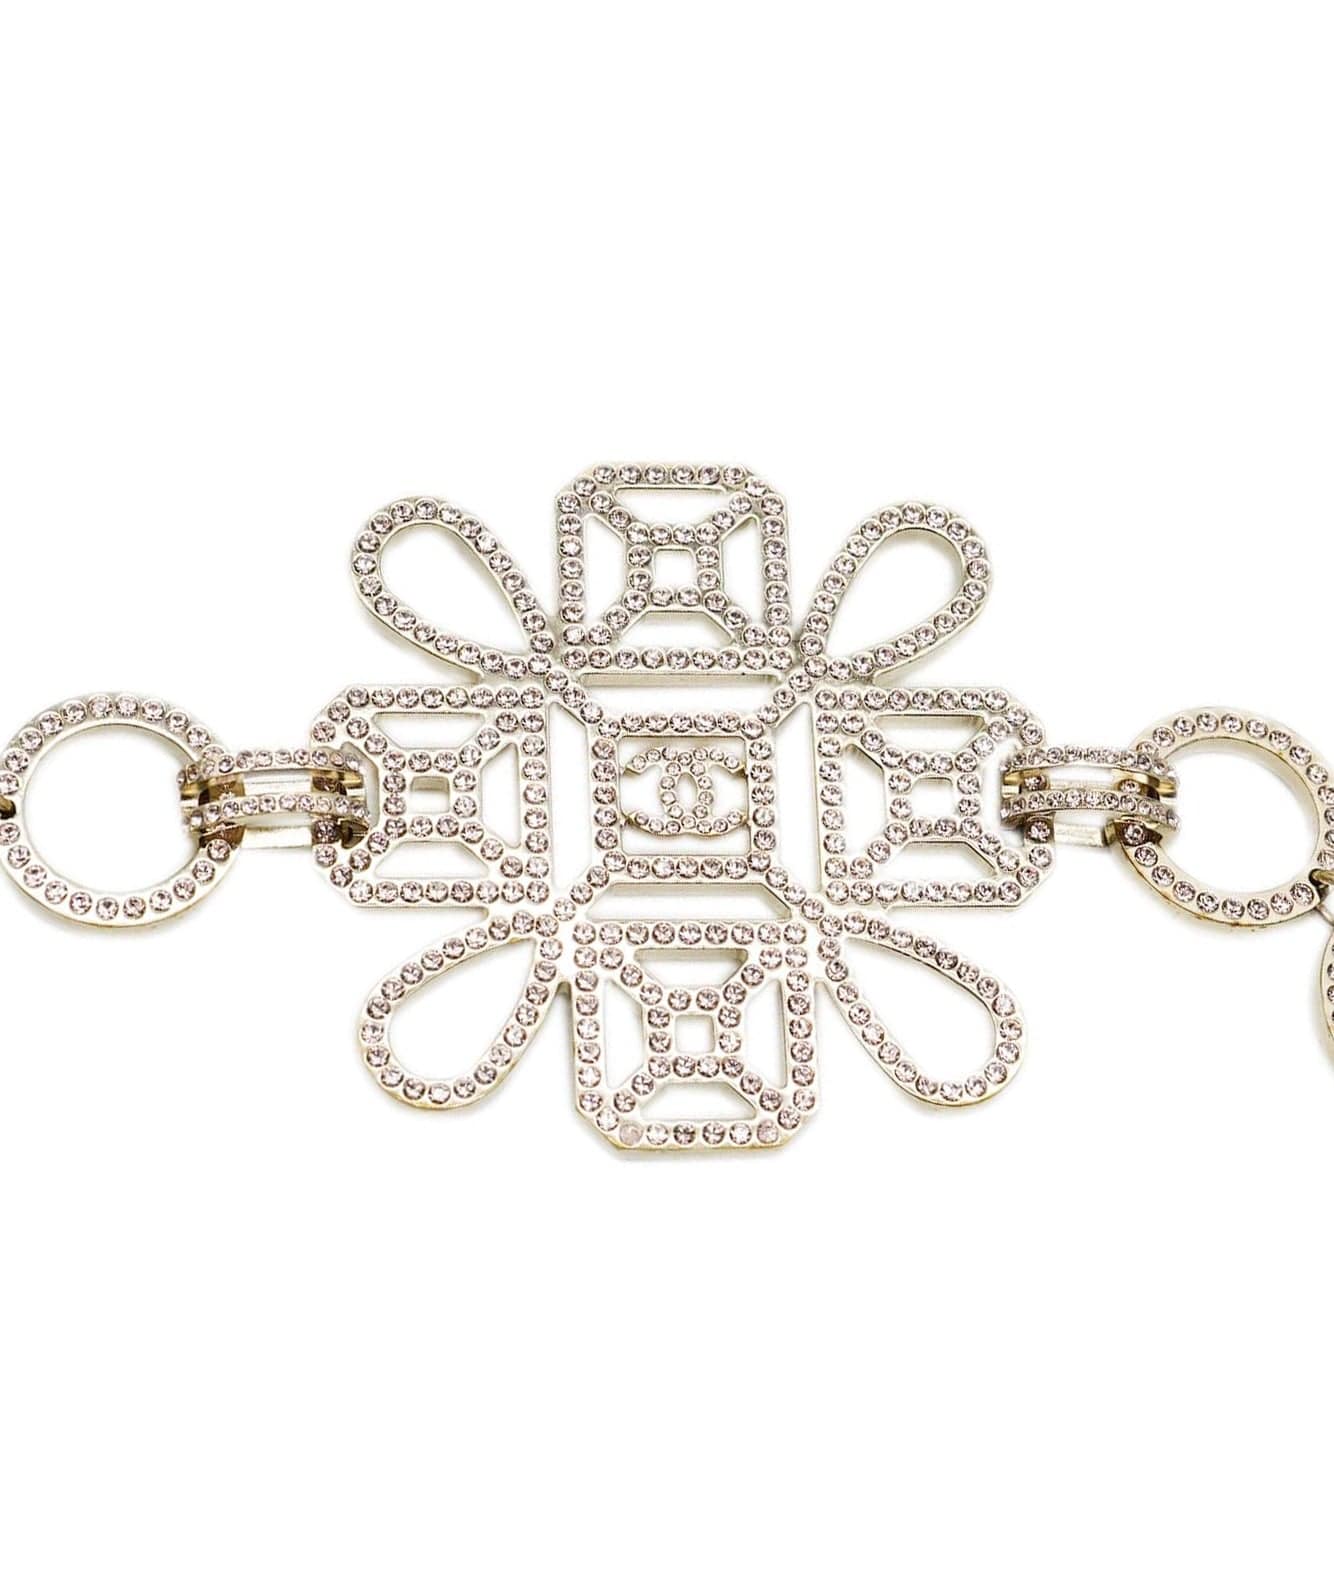 Chanel Chanel Belt Light gold with pink crystals AVC1867